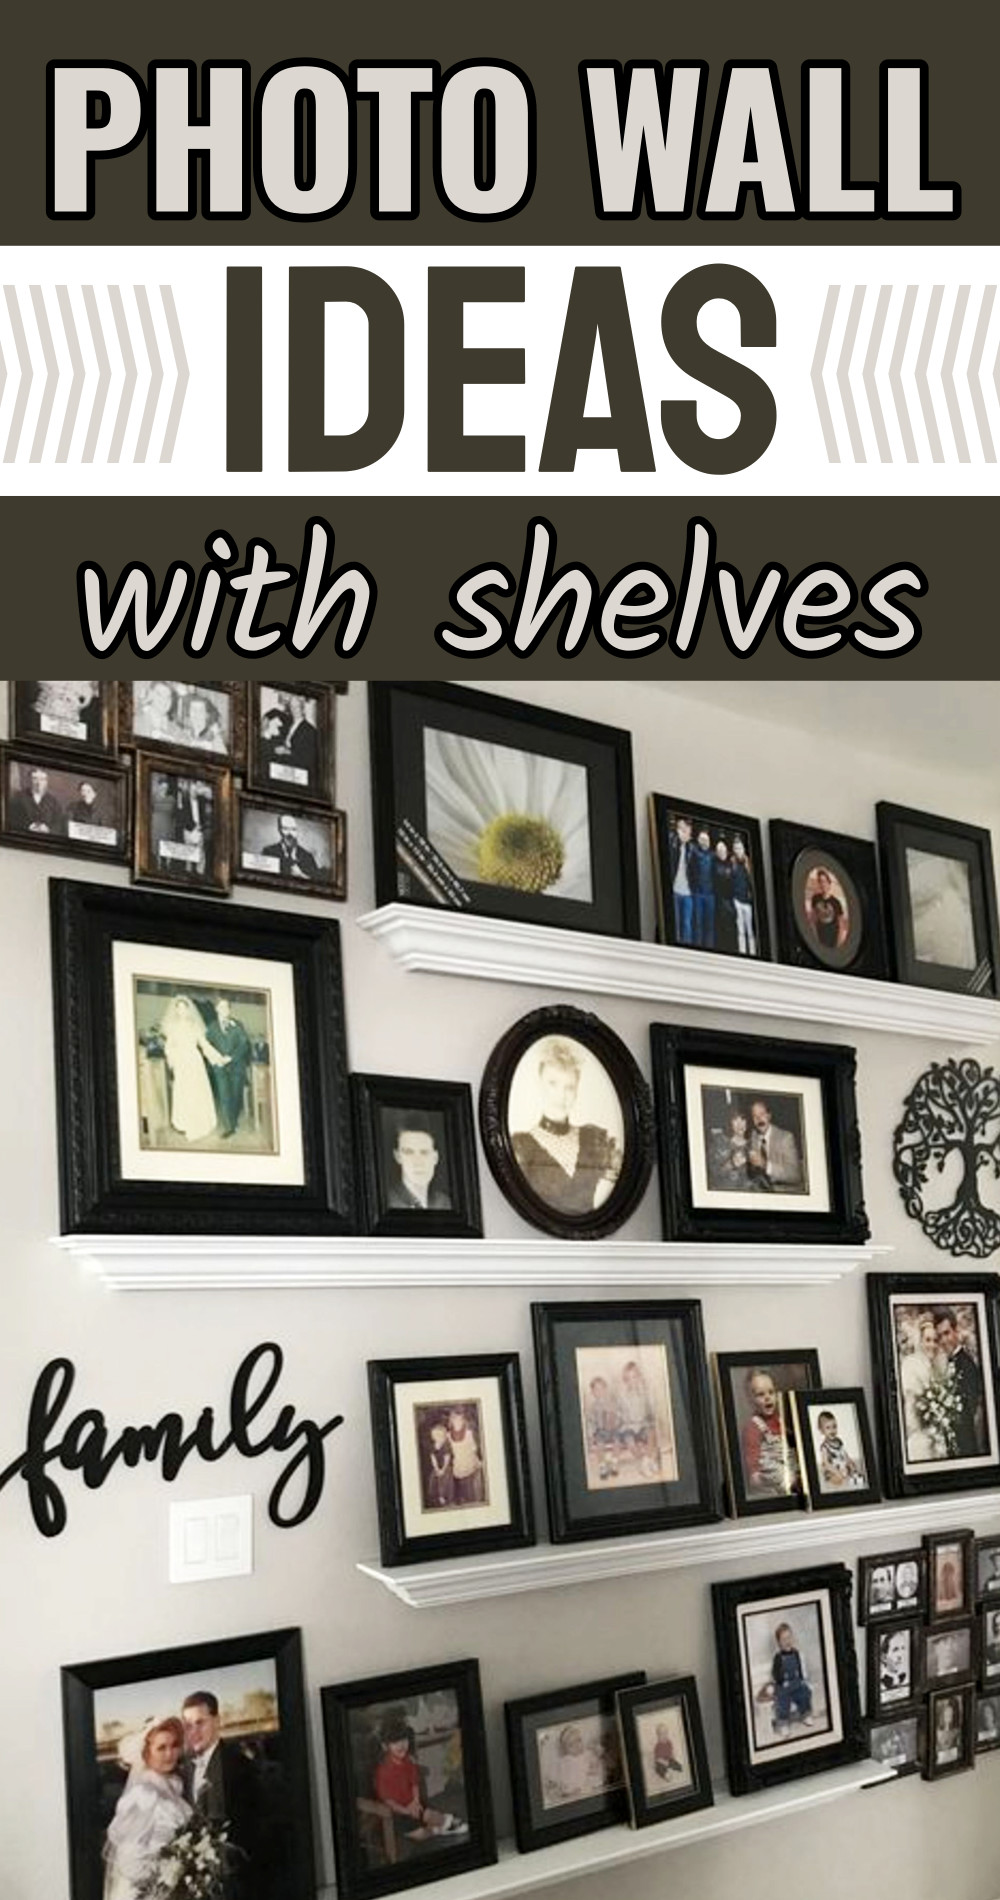 photo wall ideas with shelves from Picture and Shelf Arrangements on Walls-Ideas and Examples